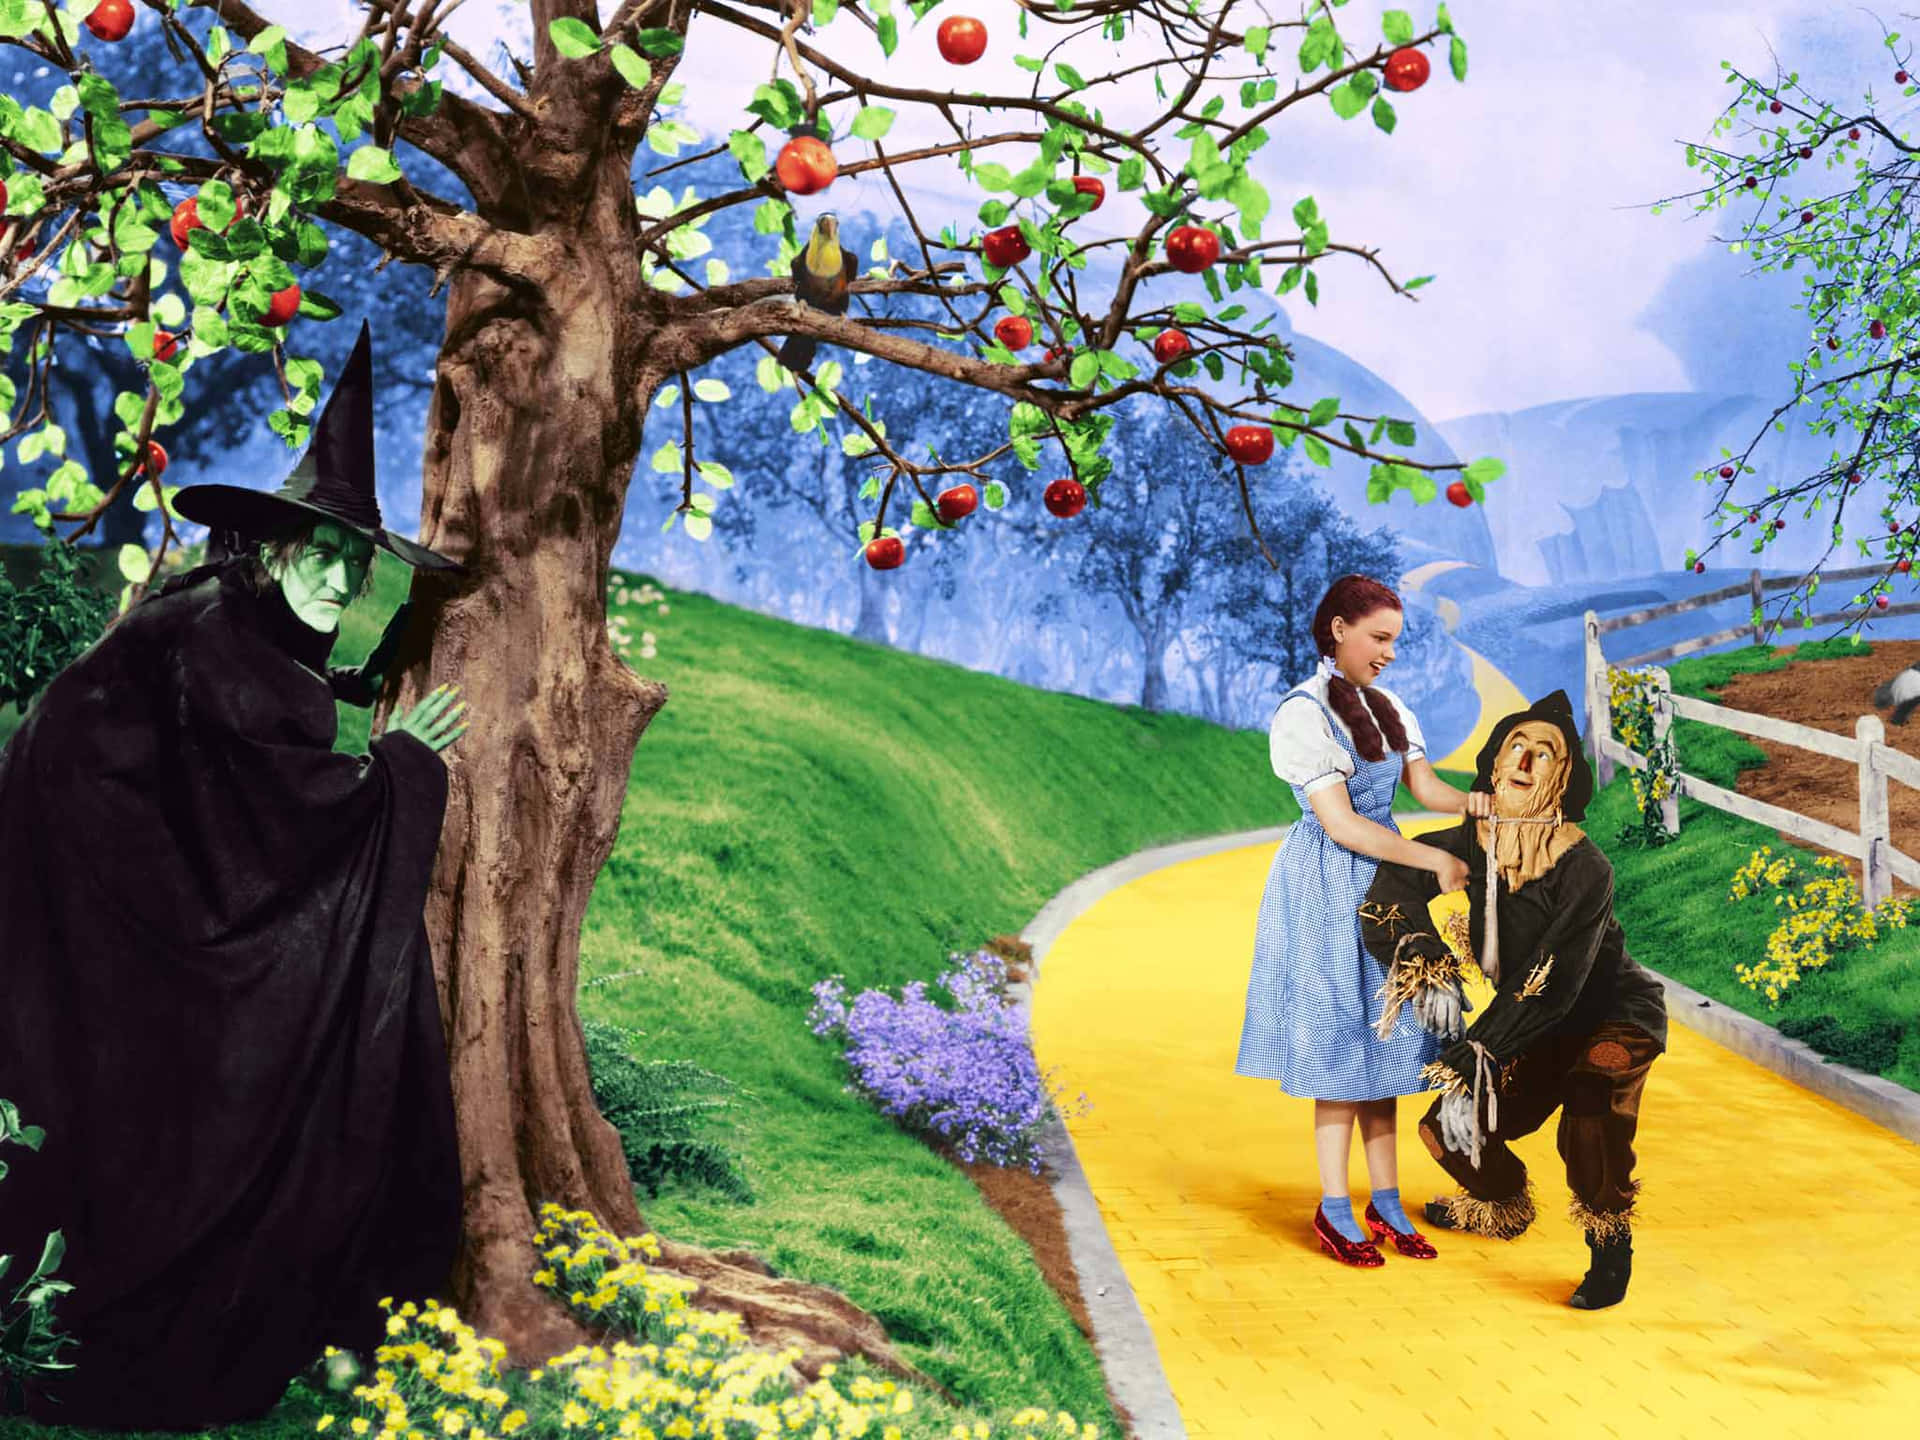 Follow the Yellow Brick Road with Dorothy and her Friends